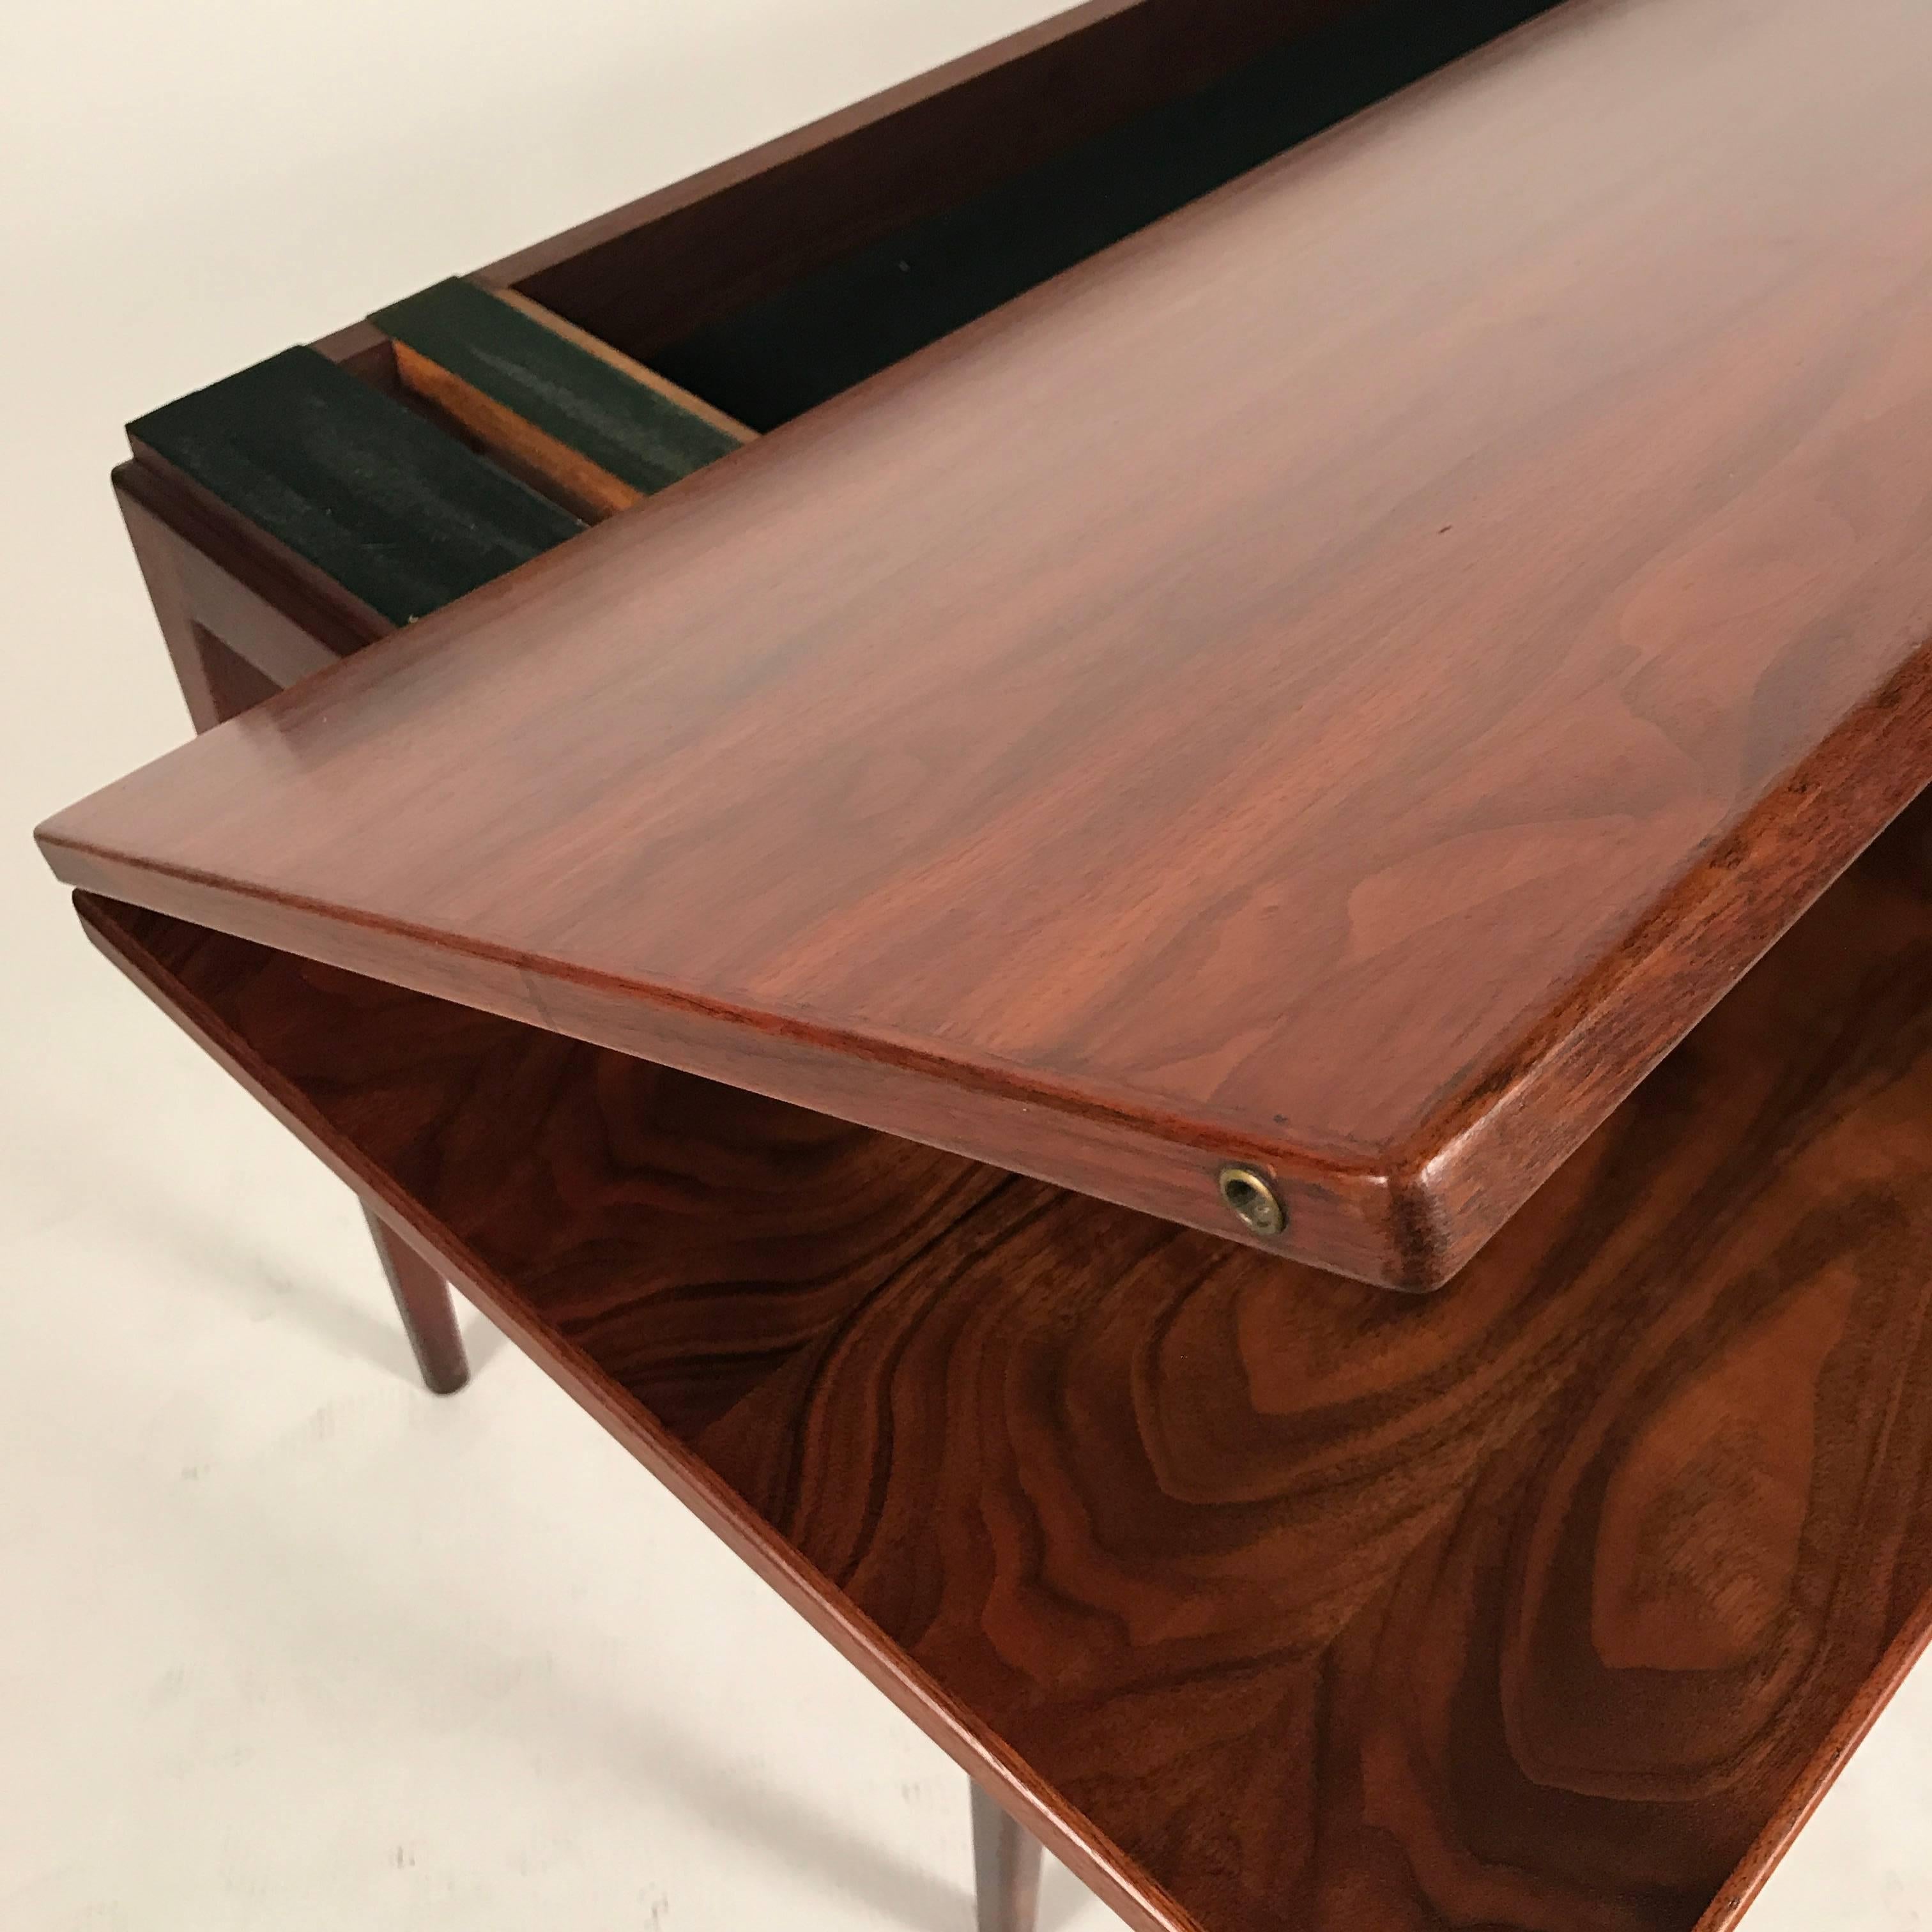 Stunning highly figured walnut flip-top console table designed by Jens Risom. Gorgeous excellent original finish with brass details. This piece works well with many styles including Danish Modern, Midcentury Modern, as well as more classical